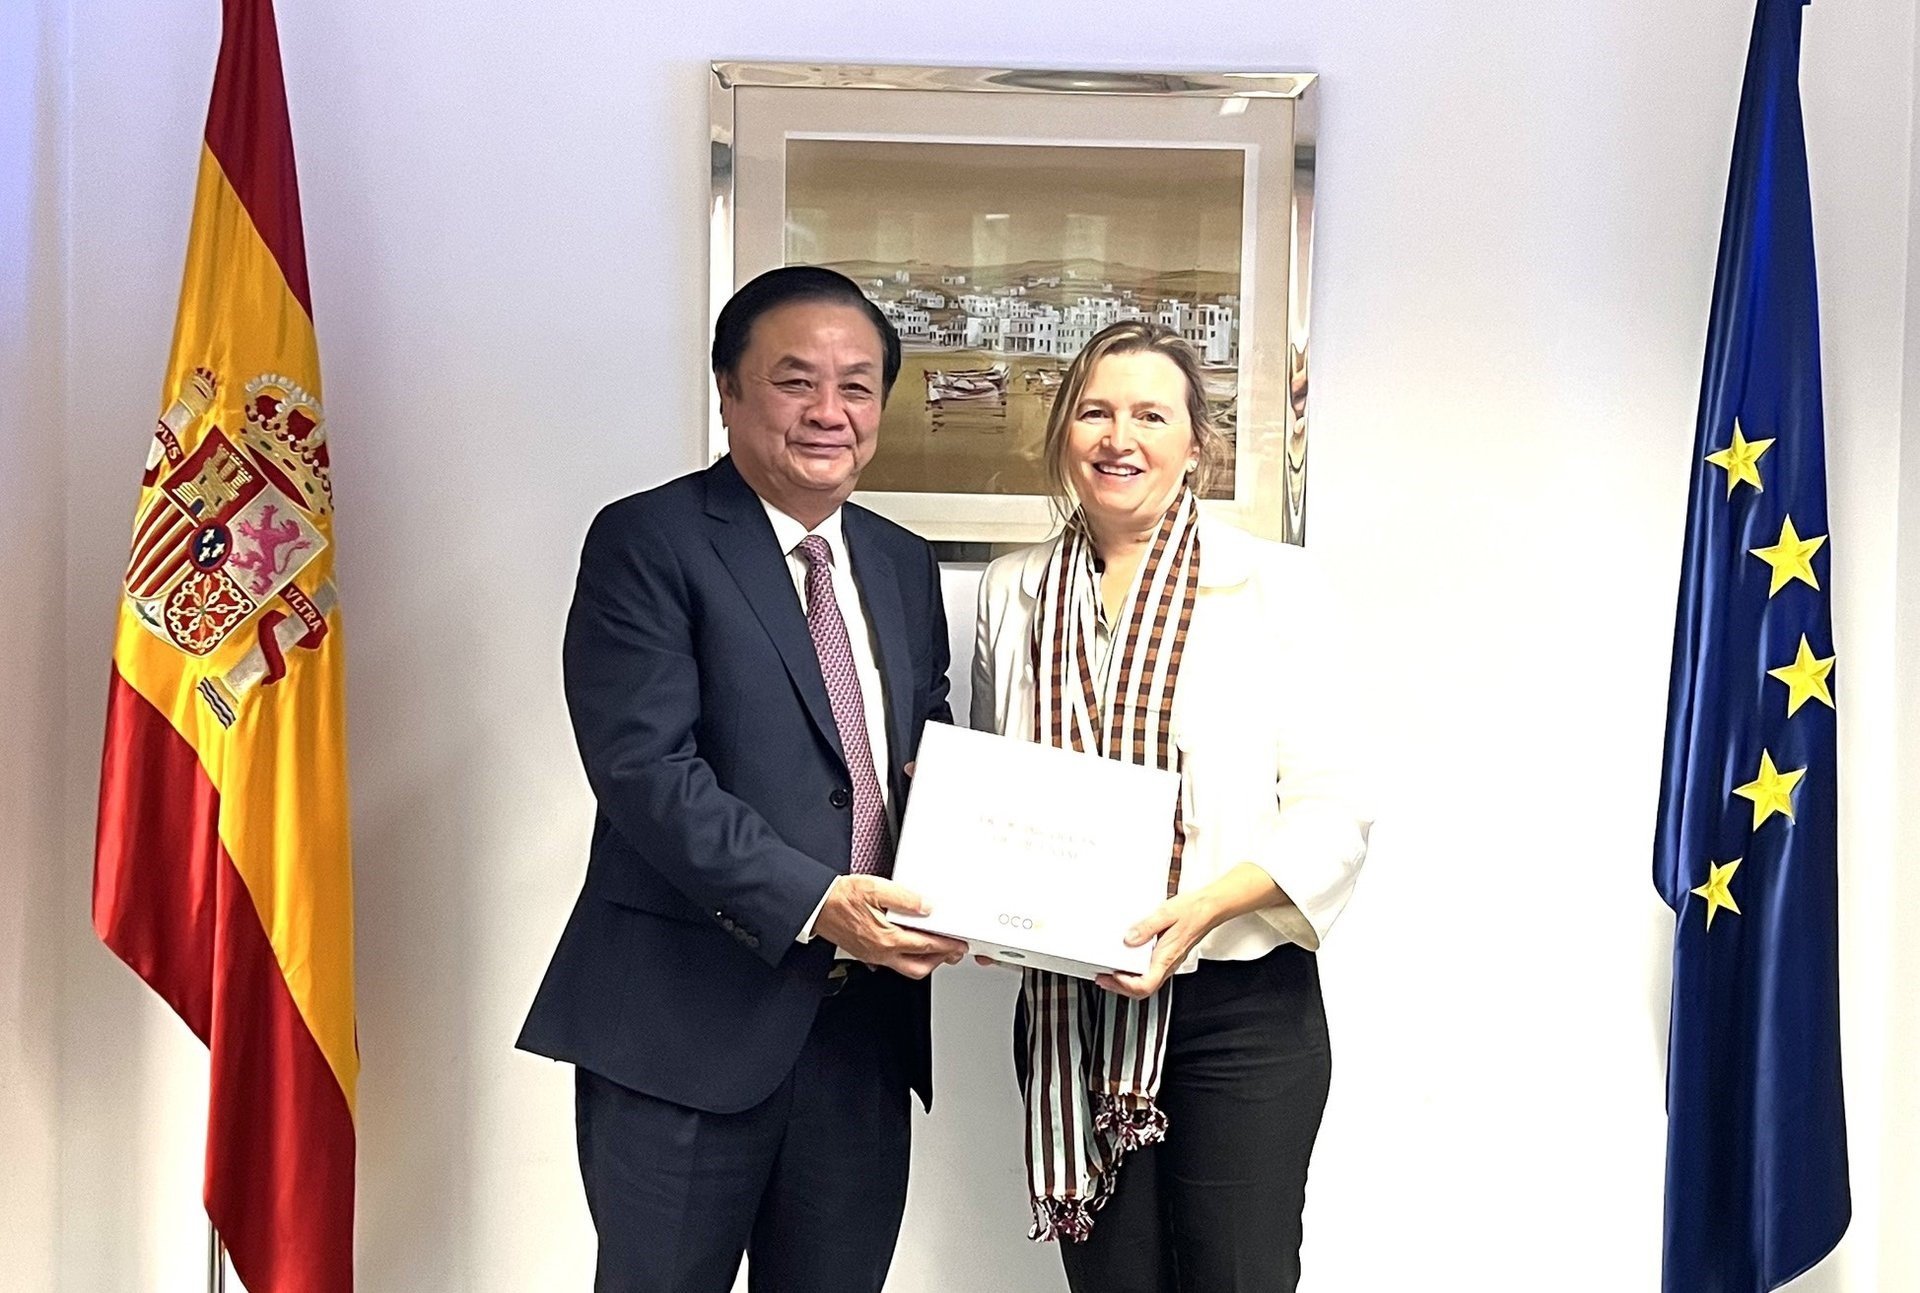 Minister Le Minh Hoan presented a gift to Ms. Isabel Artime Garcia, Secretary General of Fisheries, Spanish Ministry of Agriculture, Fisheries and Food.